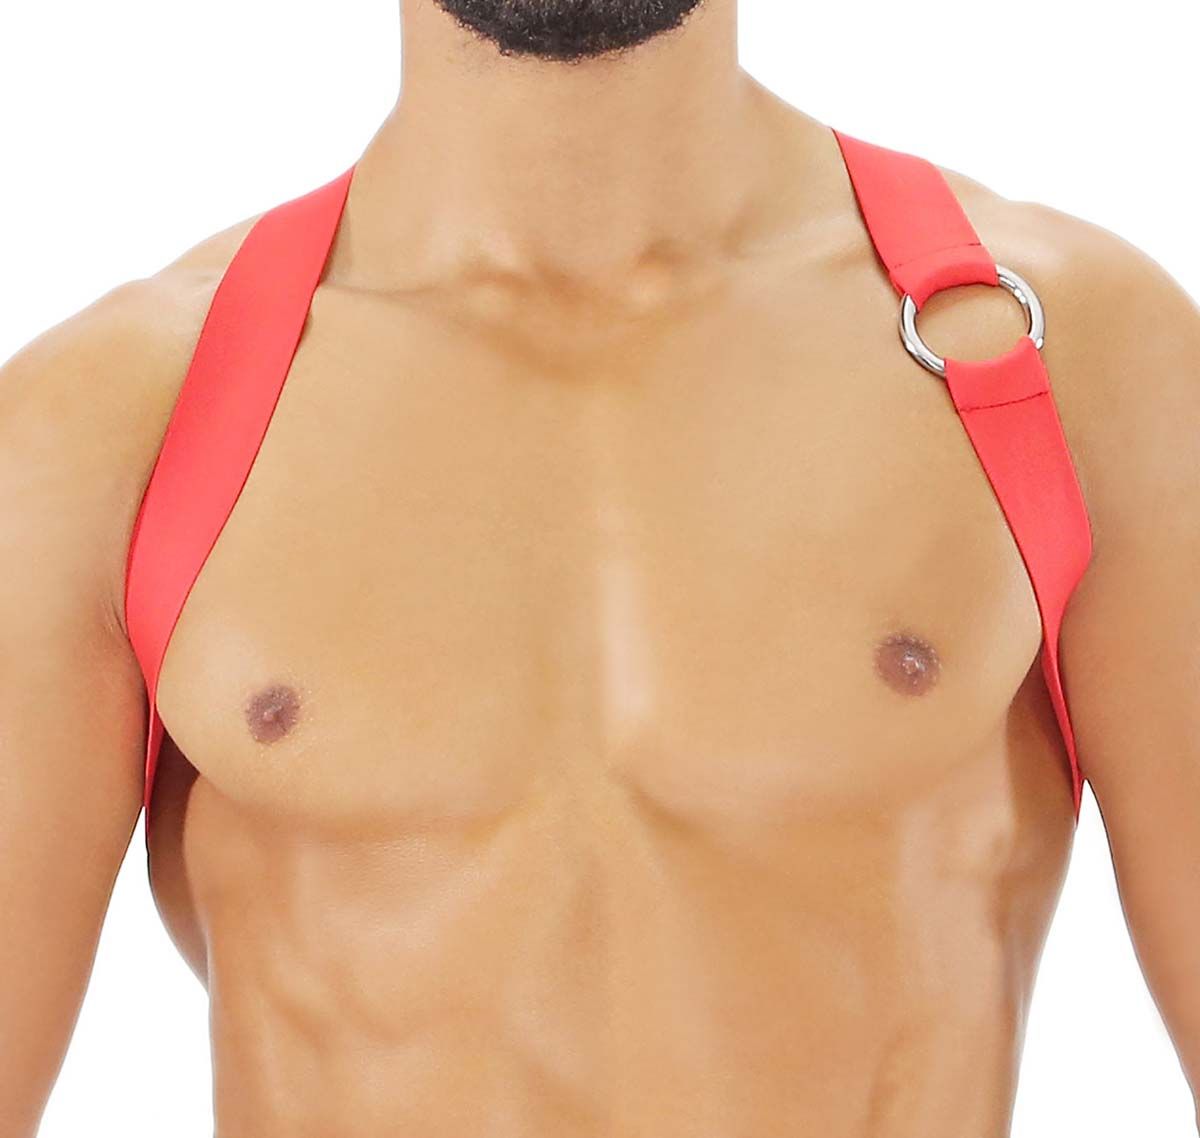 TOF Imbracatura PARTY BOY ELASTIC HARNESS RED H0018R, rosso